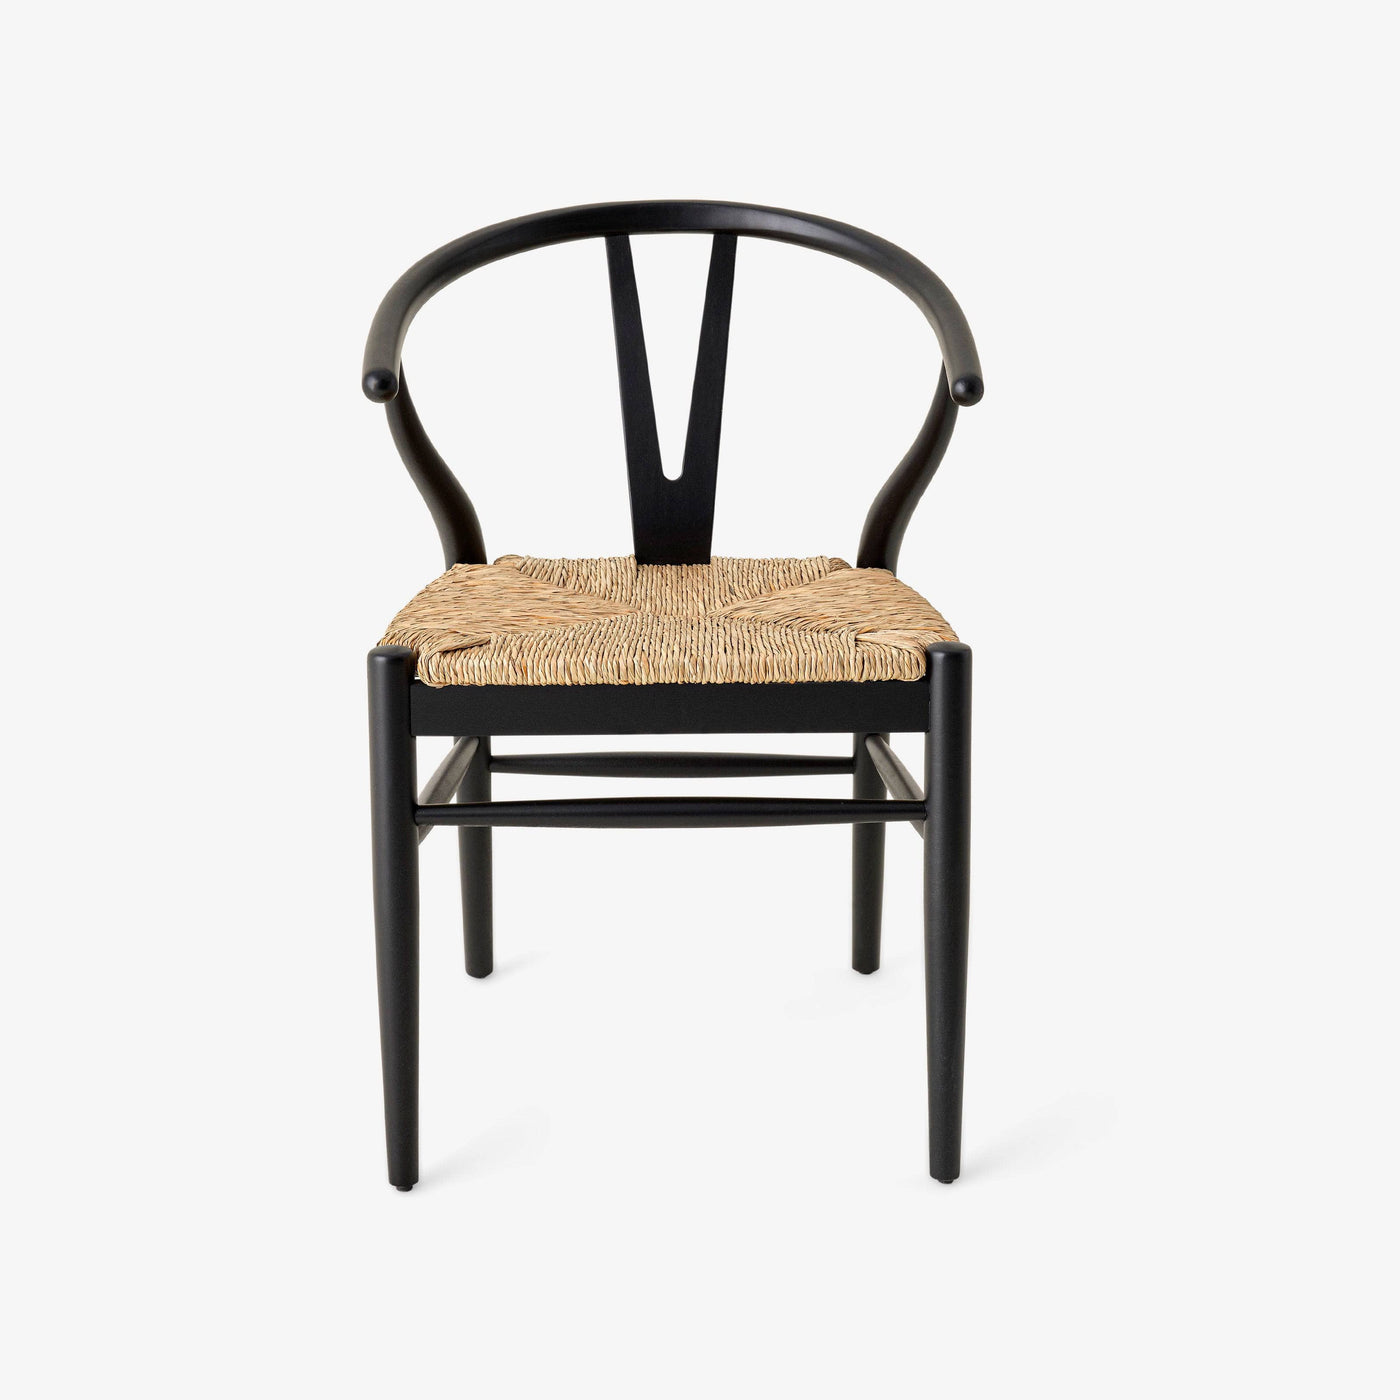 Roma Wooden Wishbone Chair, Black Dining Chairs & Benches sazy.com